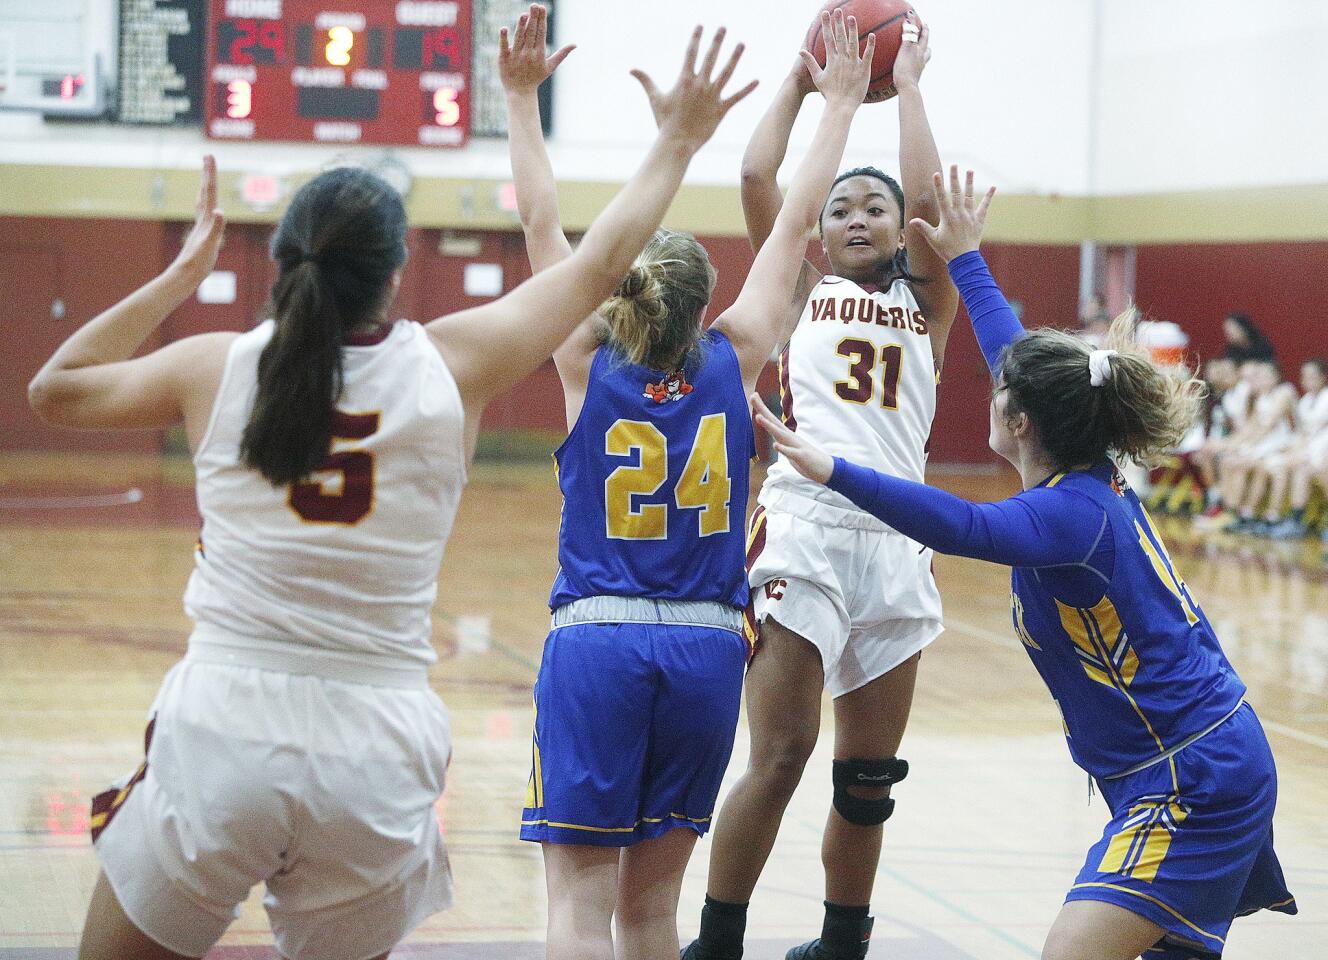 Photo Gallery: Glendale College vs. Allan Hancock College in women's basketball holiday tournament